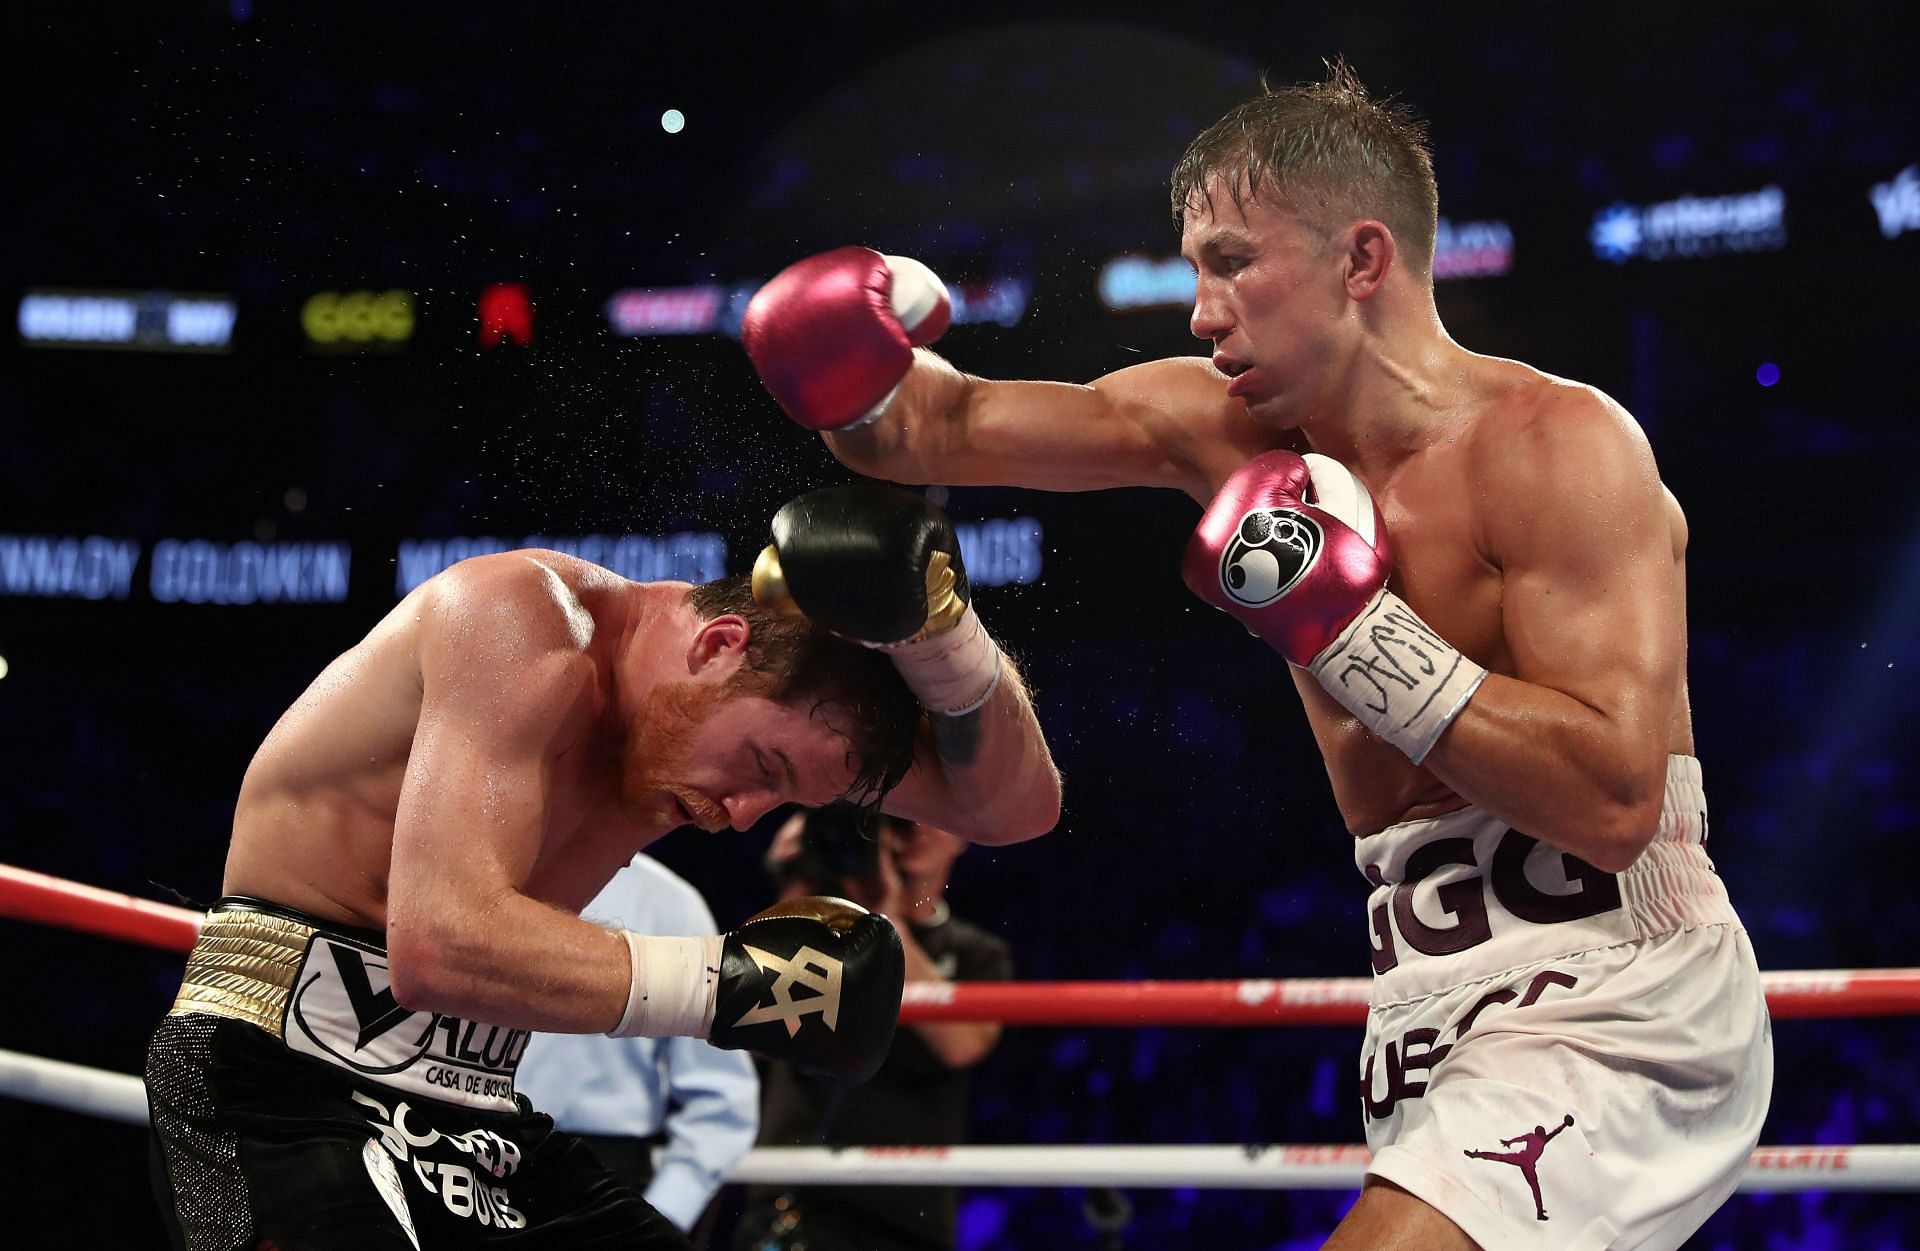 Canelo Alvarez (left) during the second fight against Gennadiy Golovkin (right) at the T-Mobile Arena.